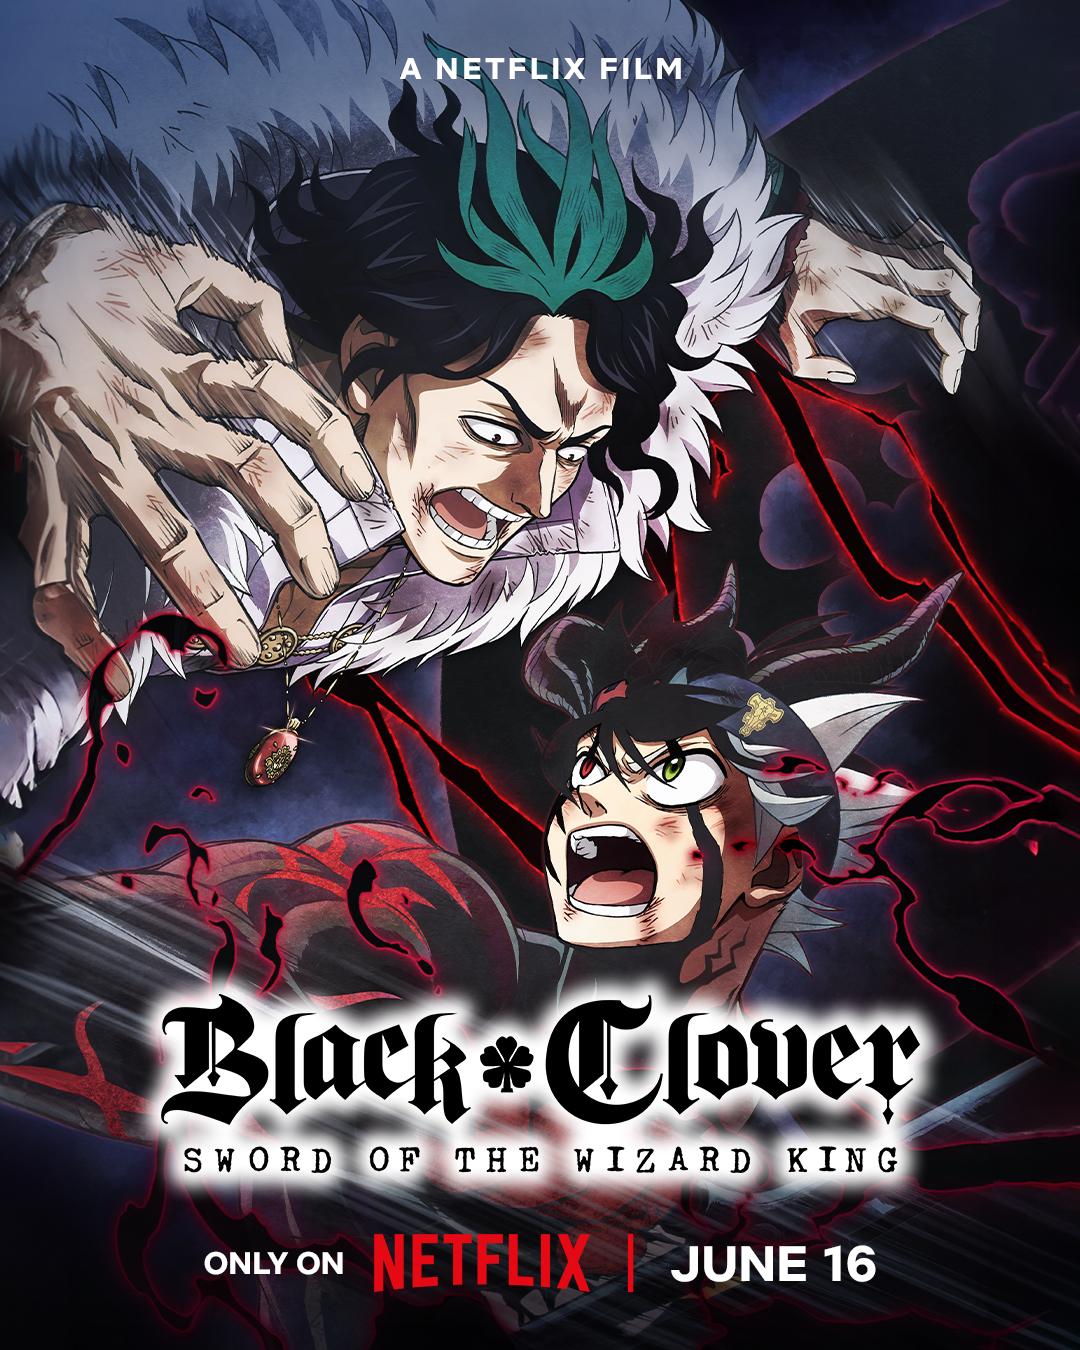 Black Clover: Sword of the Wizard King movie visual